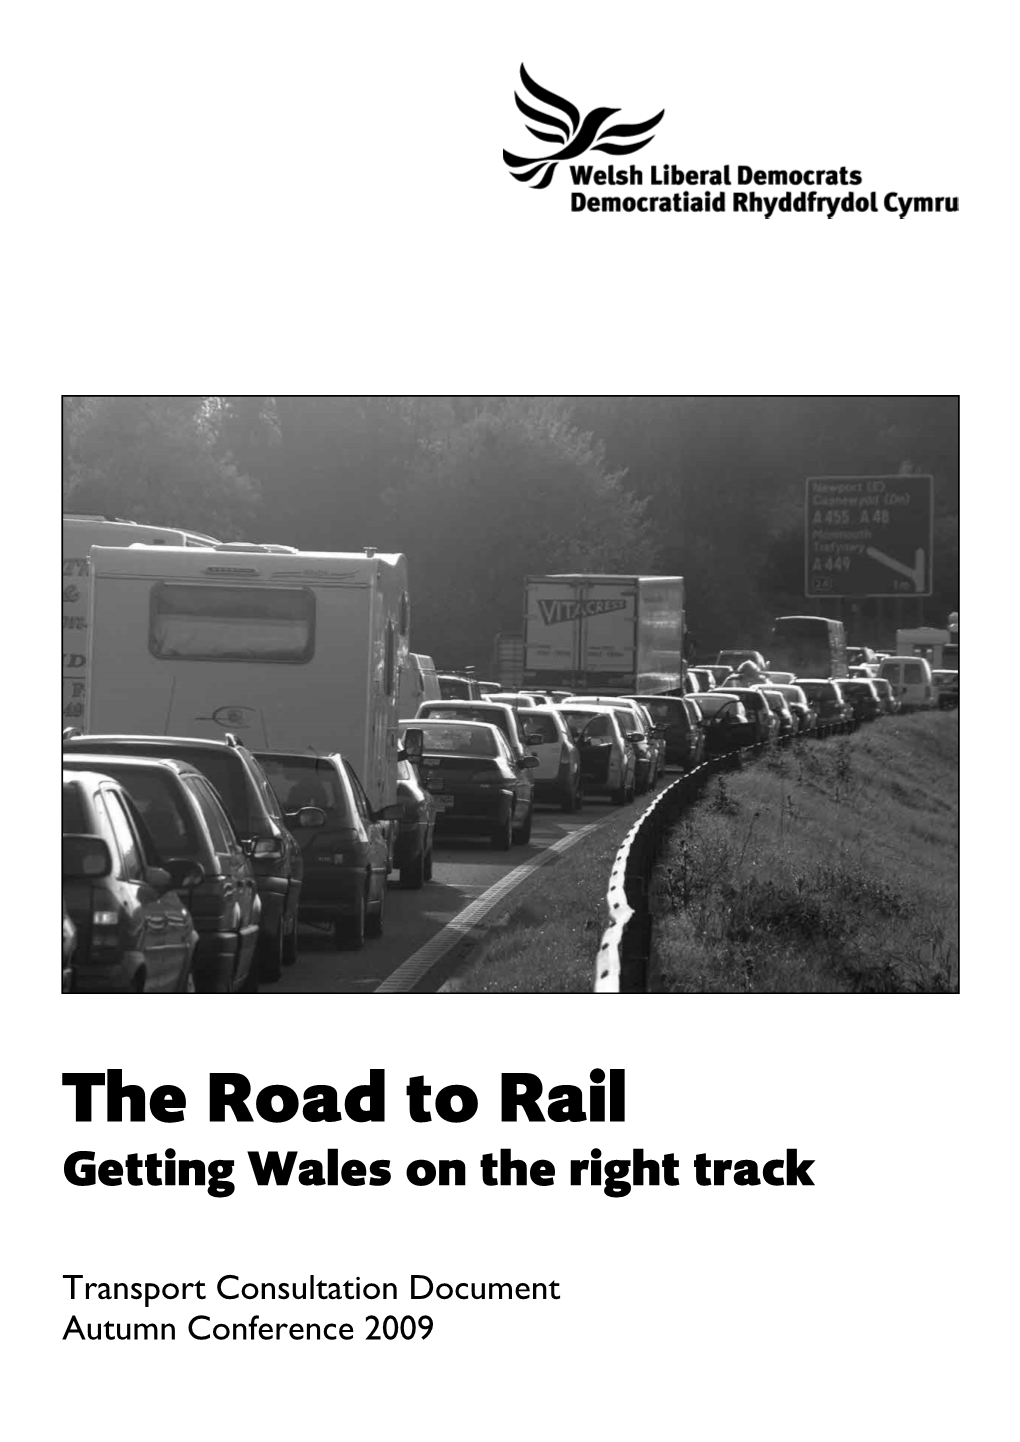 The Road to Rail Getting Wales on the Right Track